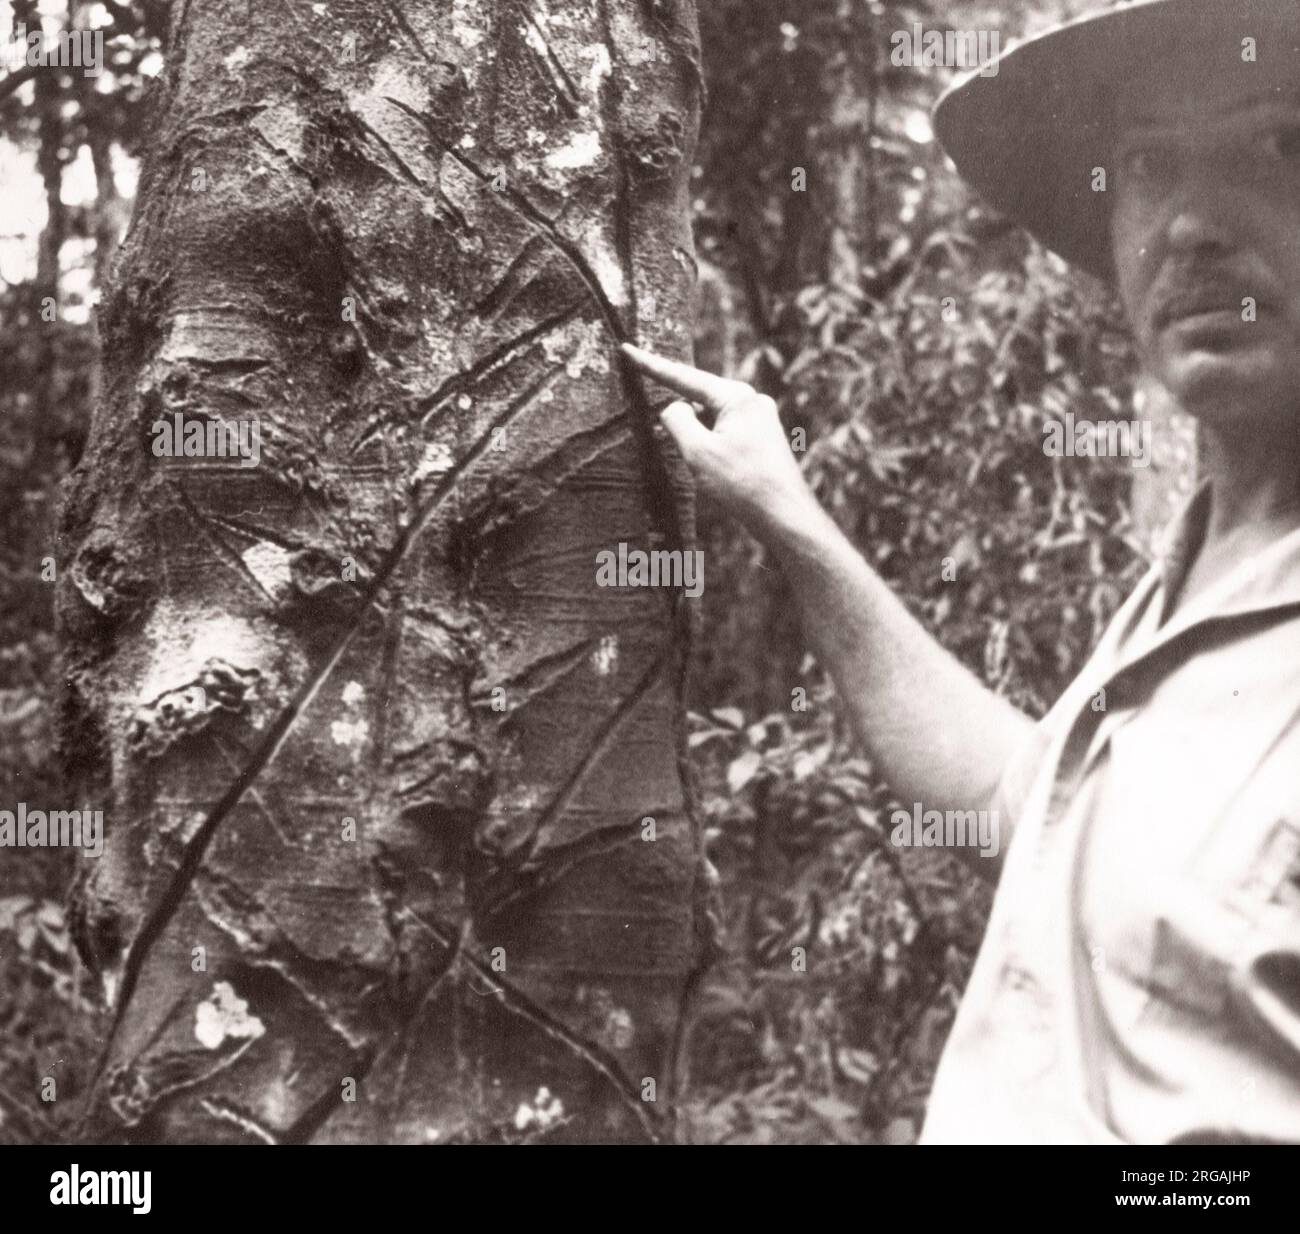 1940s East Africa Uganda - Budongo forest - a wild rubber tree with 30 year old scars Photograph by a British army recruitment officer stationed in East Africa and the Middle East during World War II Stock Photo